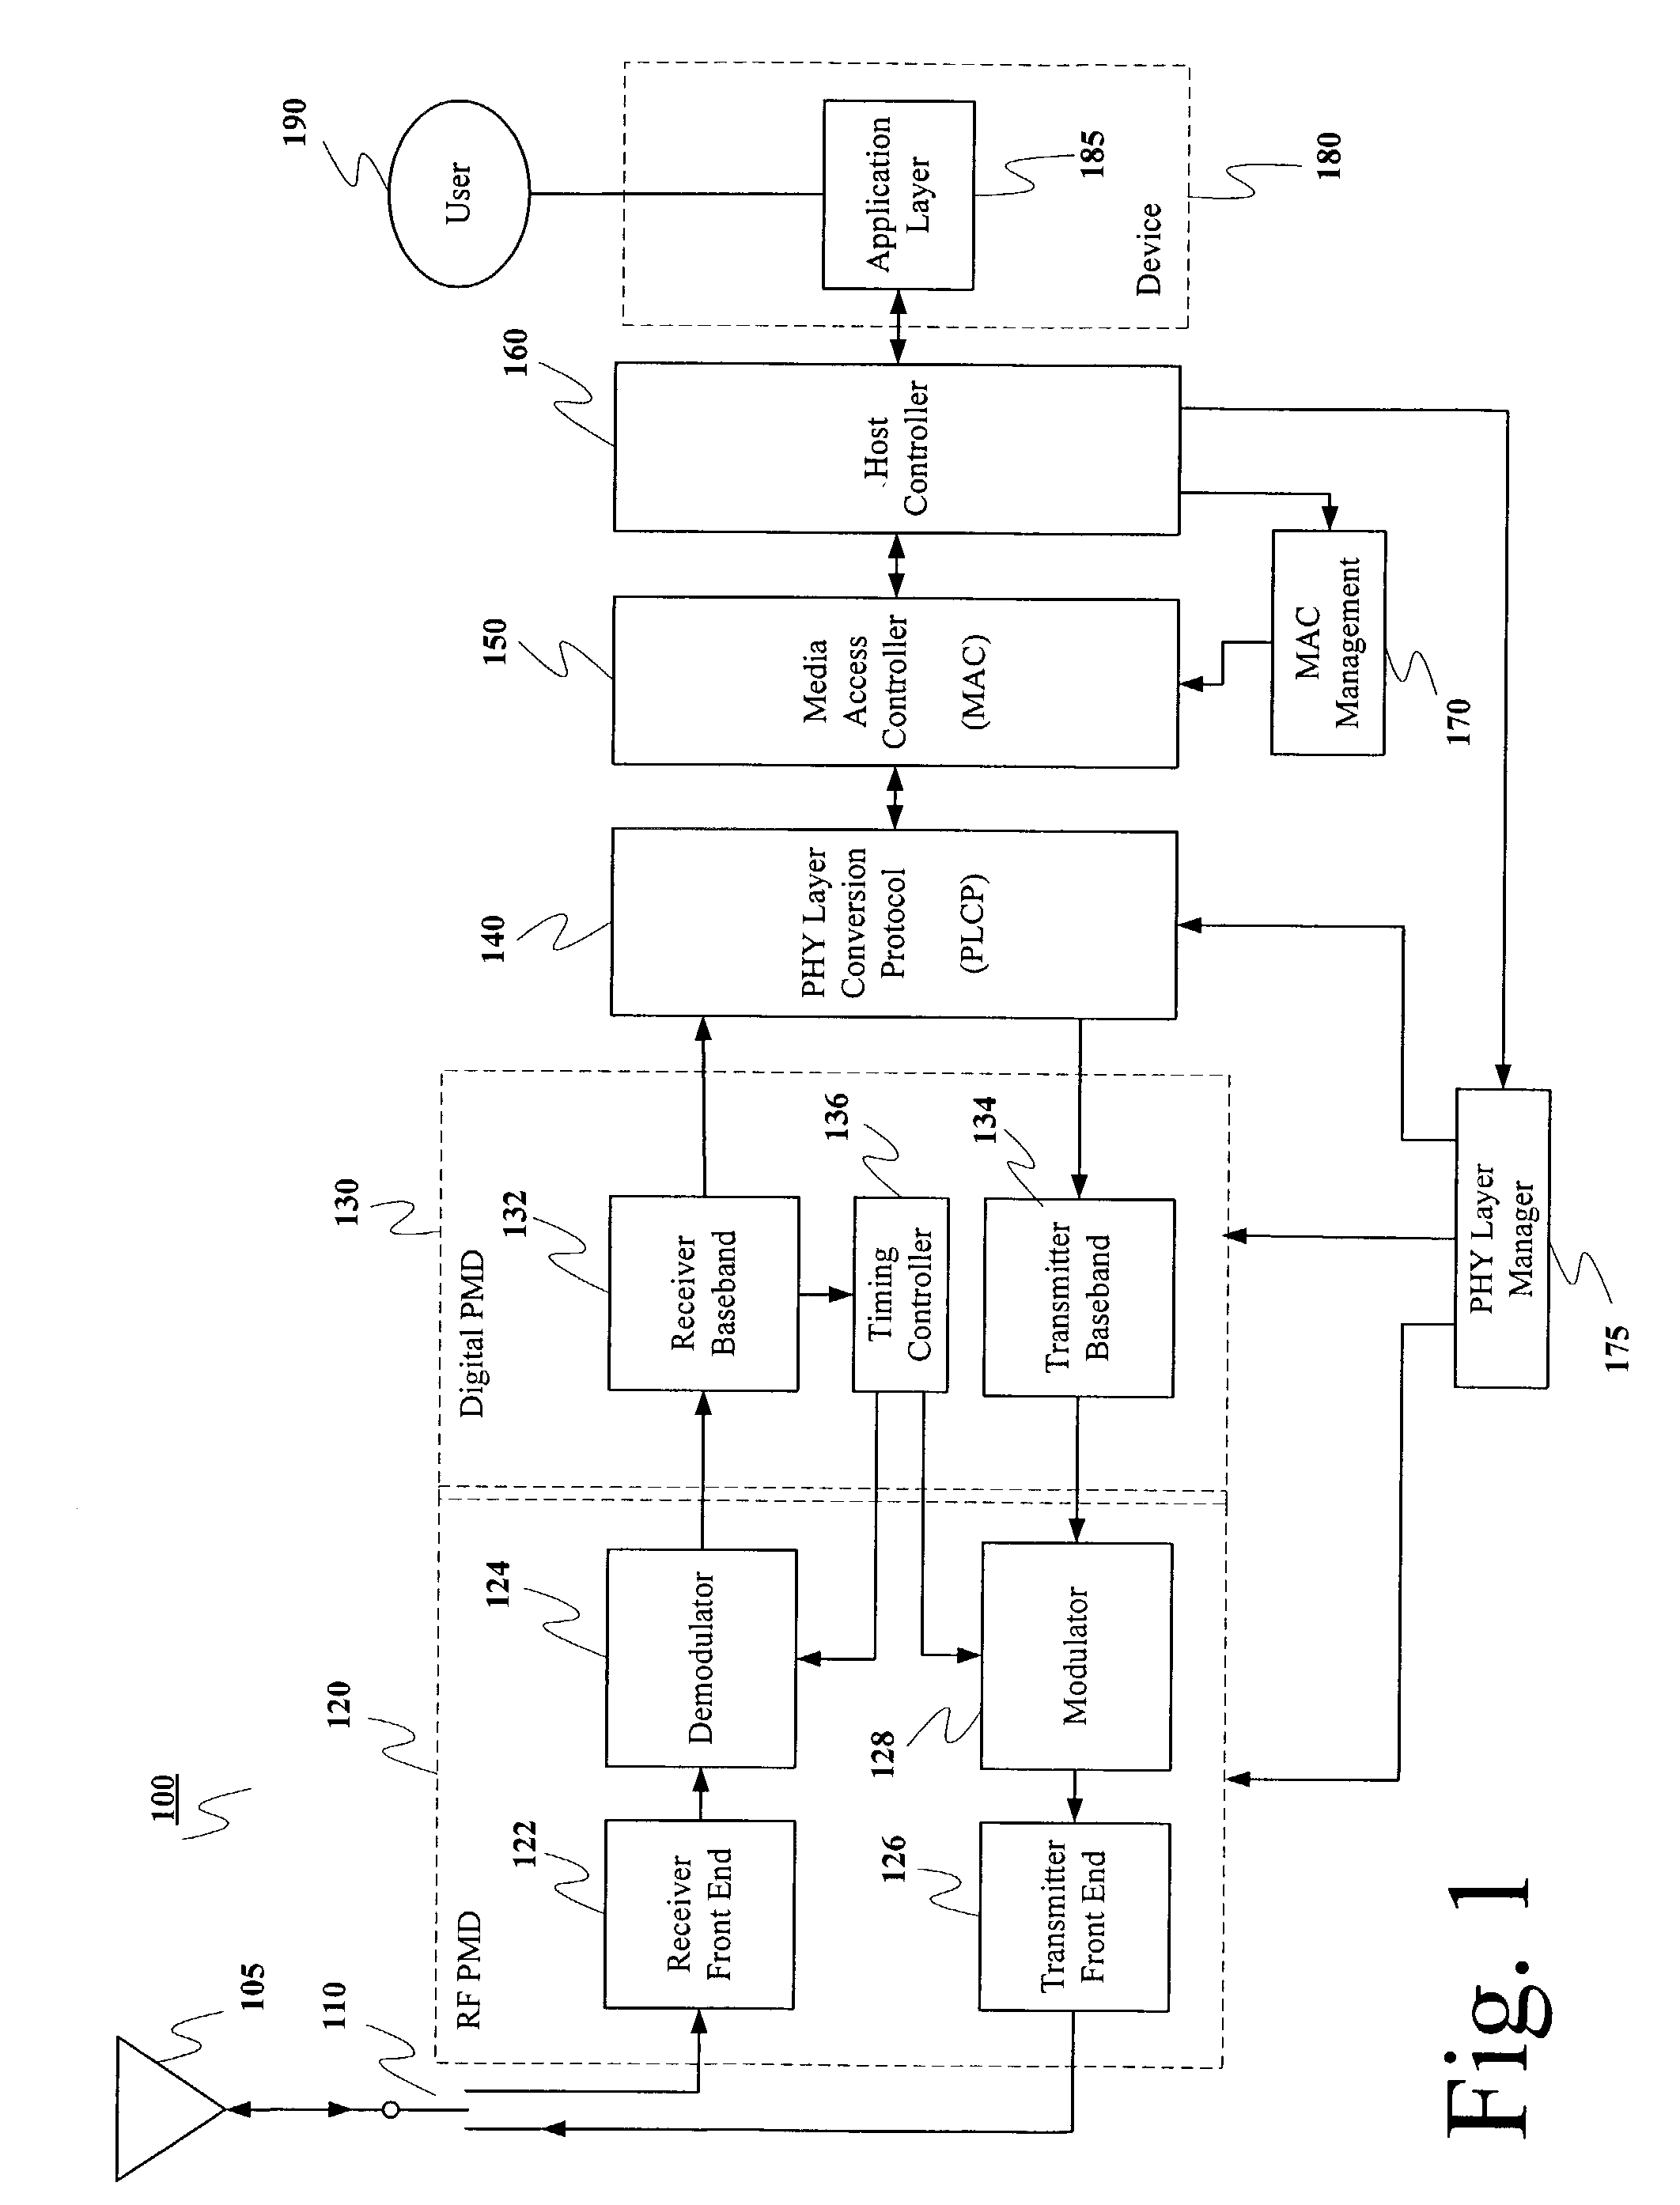 Method and system for performing distance measuring and direction finding using ultrawide bandwidth transmissions